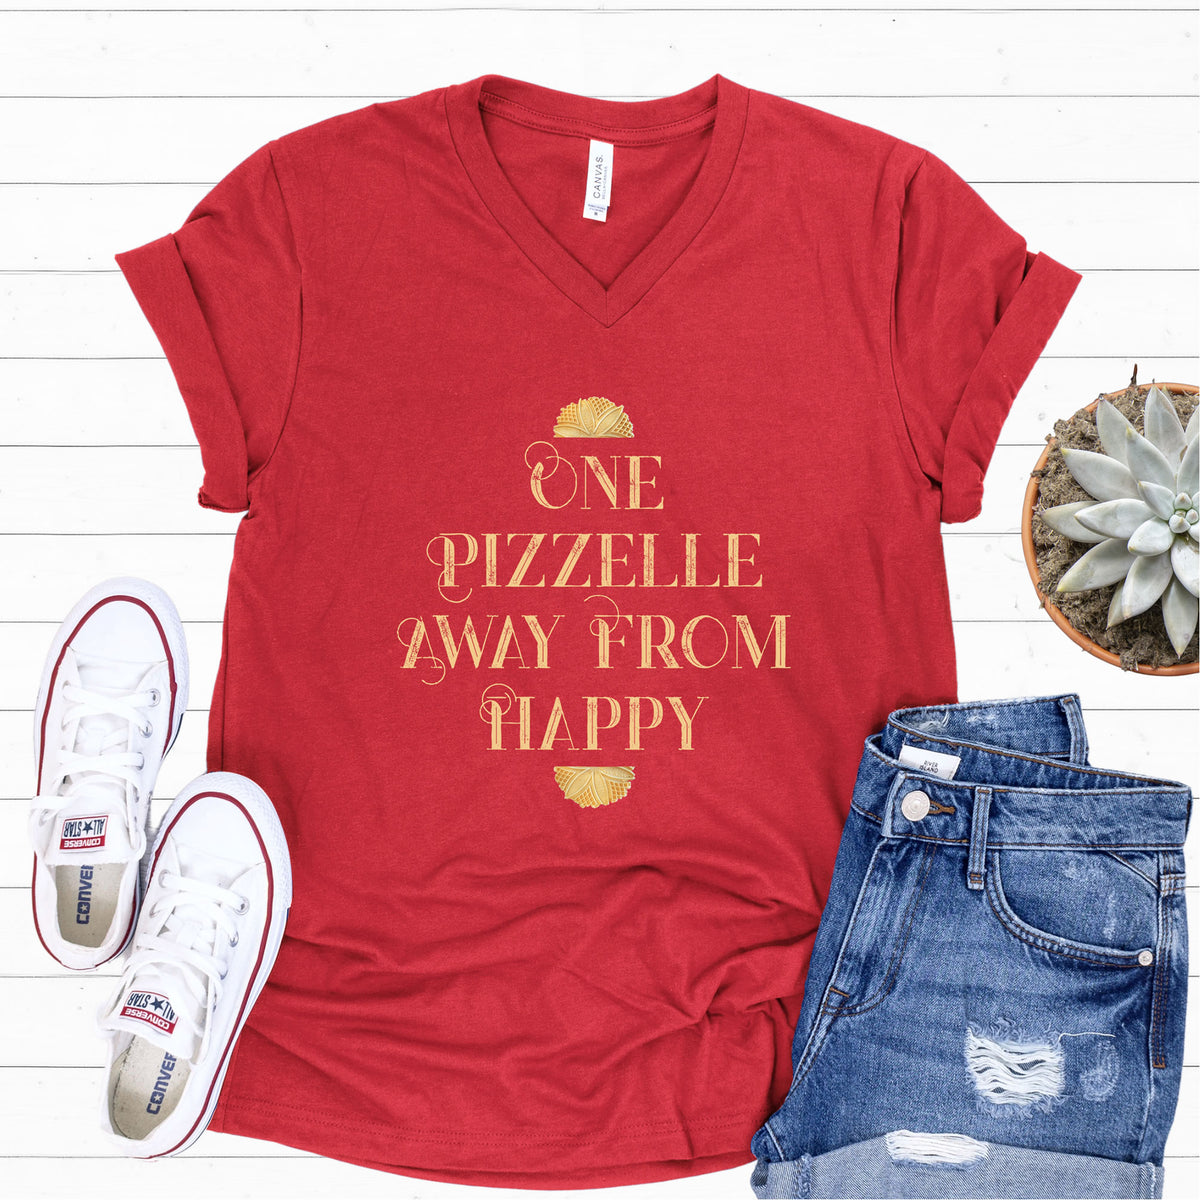 Italian Pizzelle Holiday Cookies Shirt | Foodie Baking Gift  | Unisex Red V-neck T-shirt